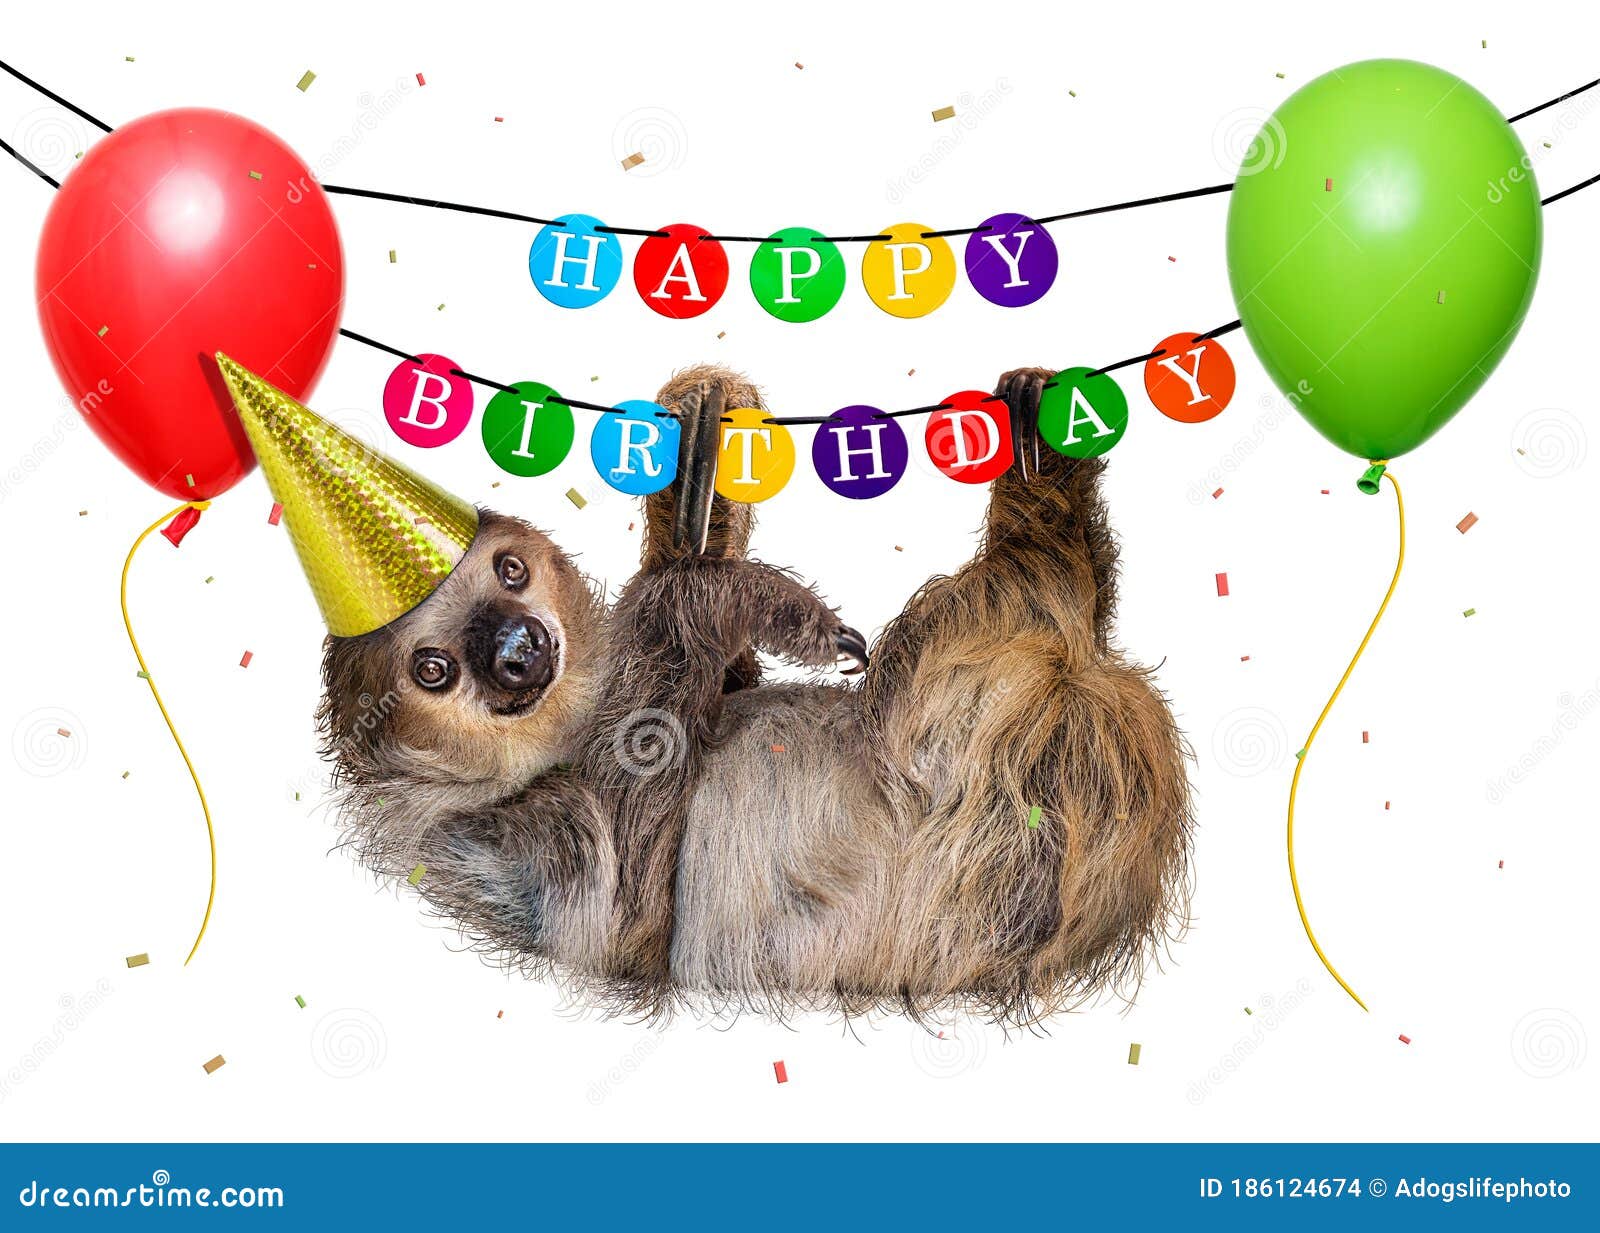 Funny Sloth Hanging from Happy Birthday Banner Stock Photo ...